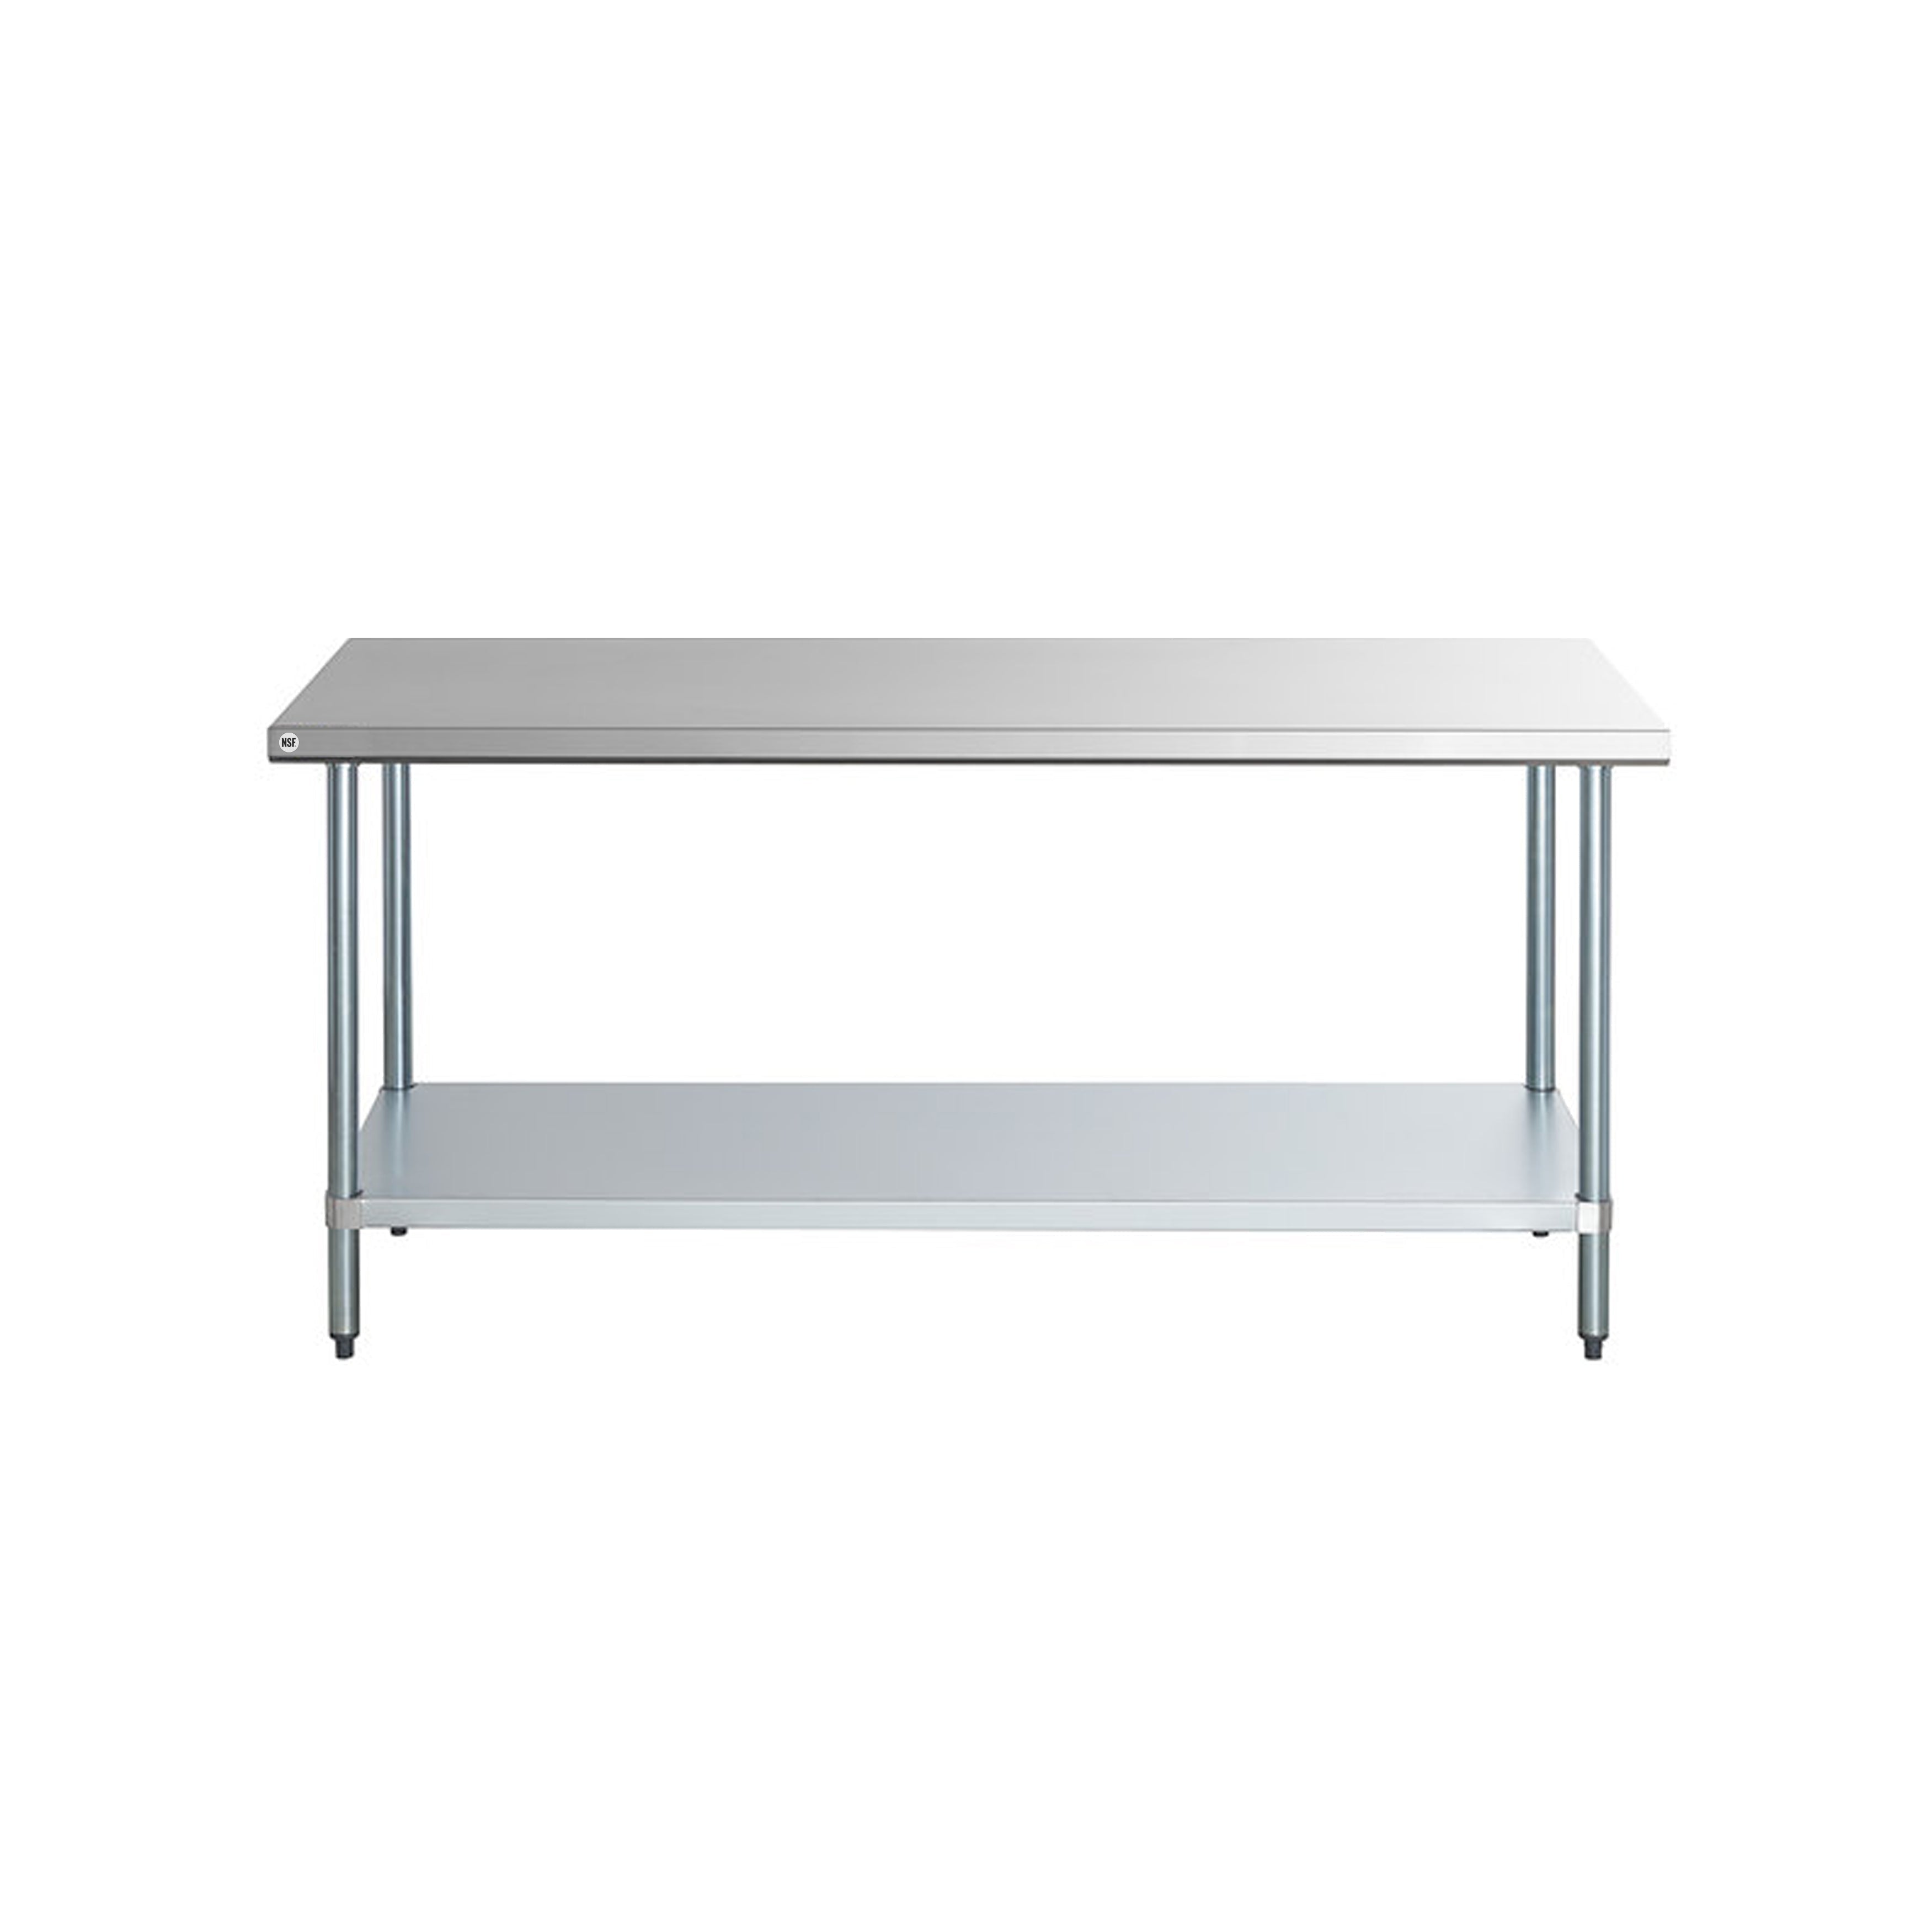 Omcan - 22070, Commercial 24" x 96" Stainless Steel Kitchen Work Table 1600lbs Light Duty